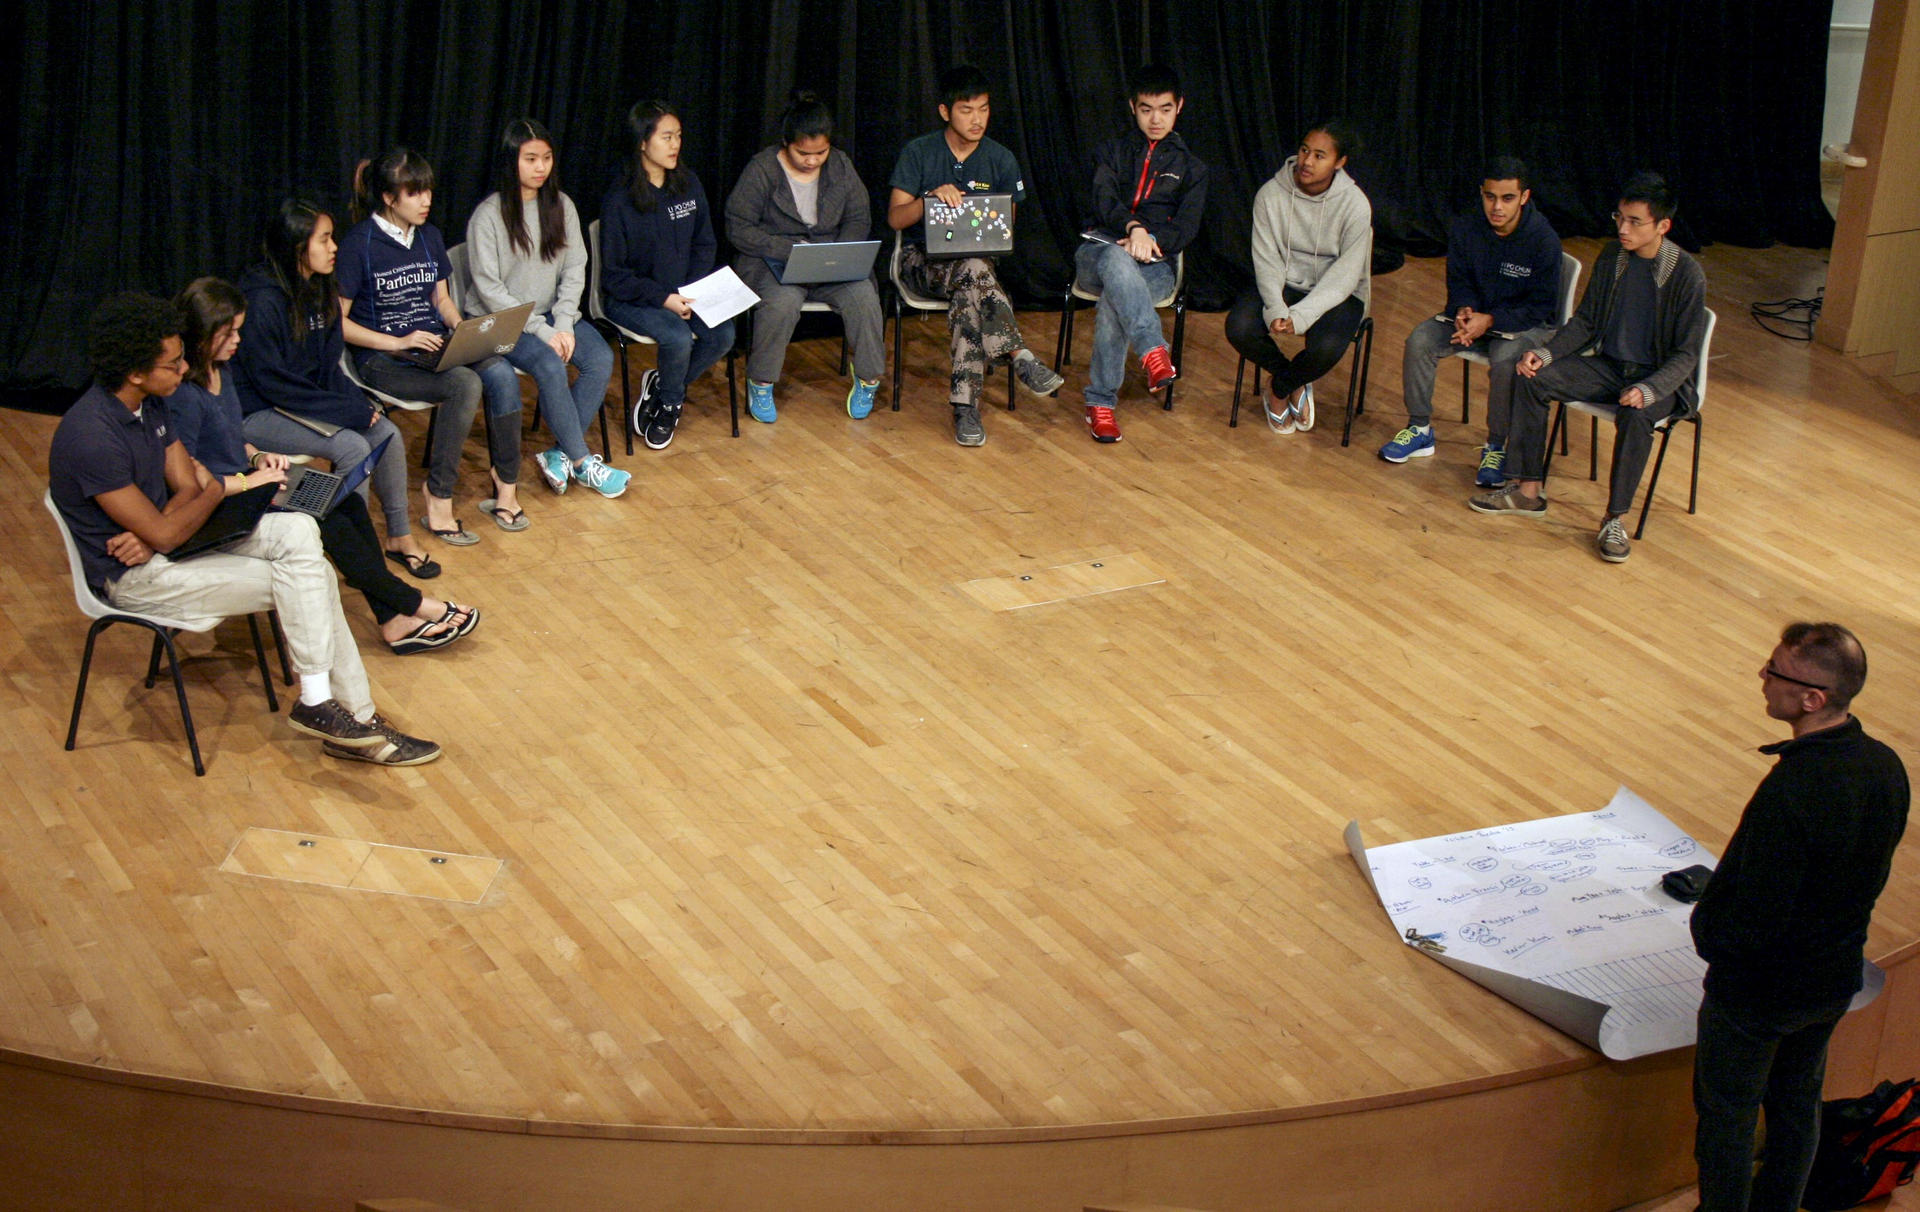 Steve Reynolds discusses the running order for the performance with students from Li Po Chun United World College.